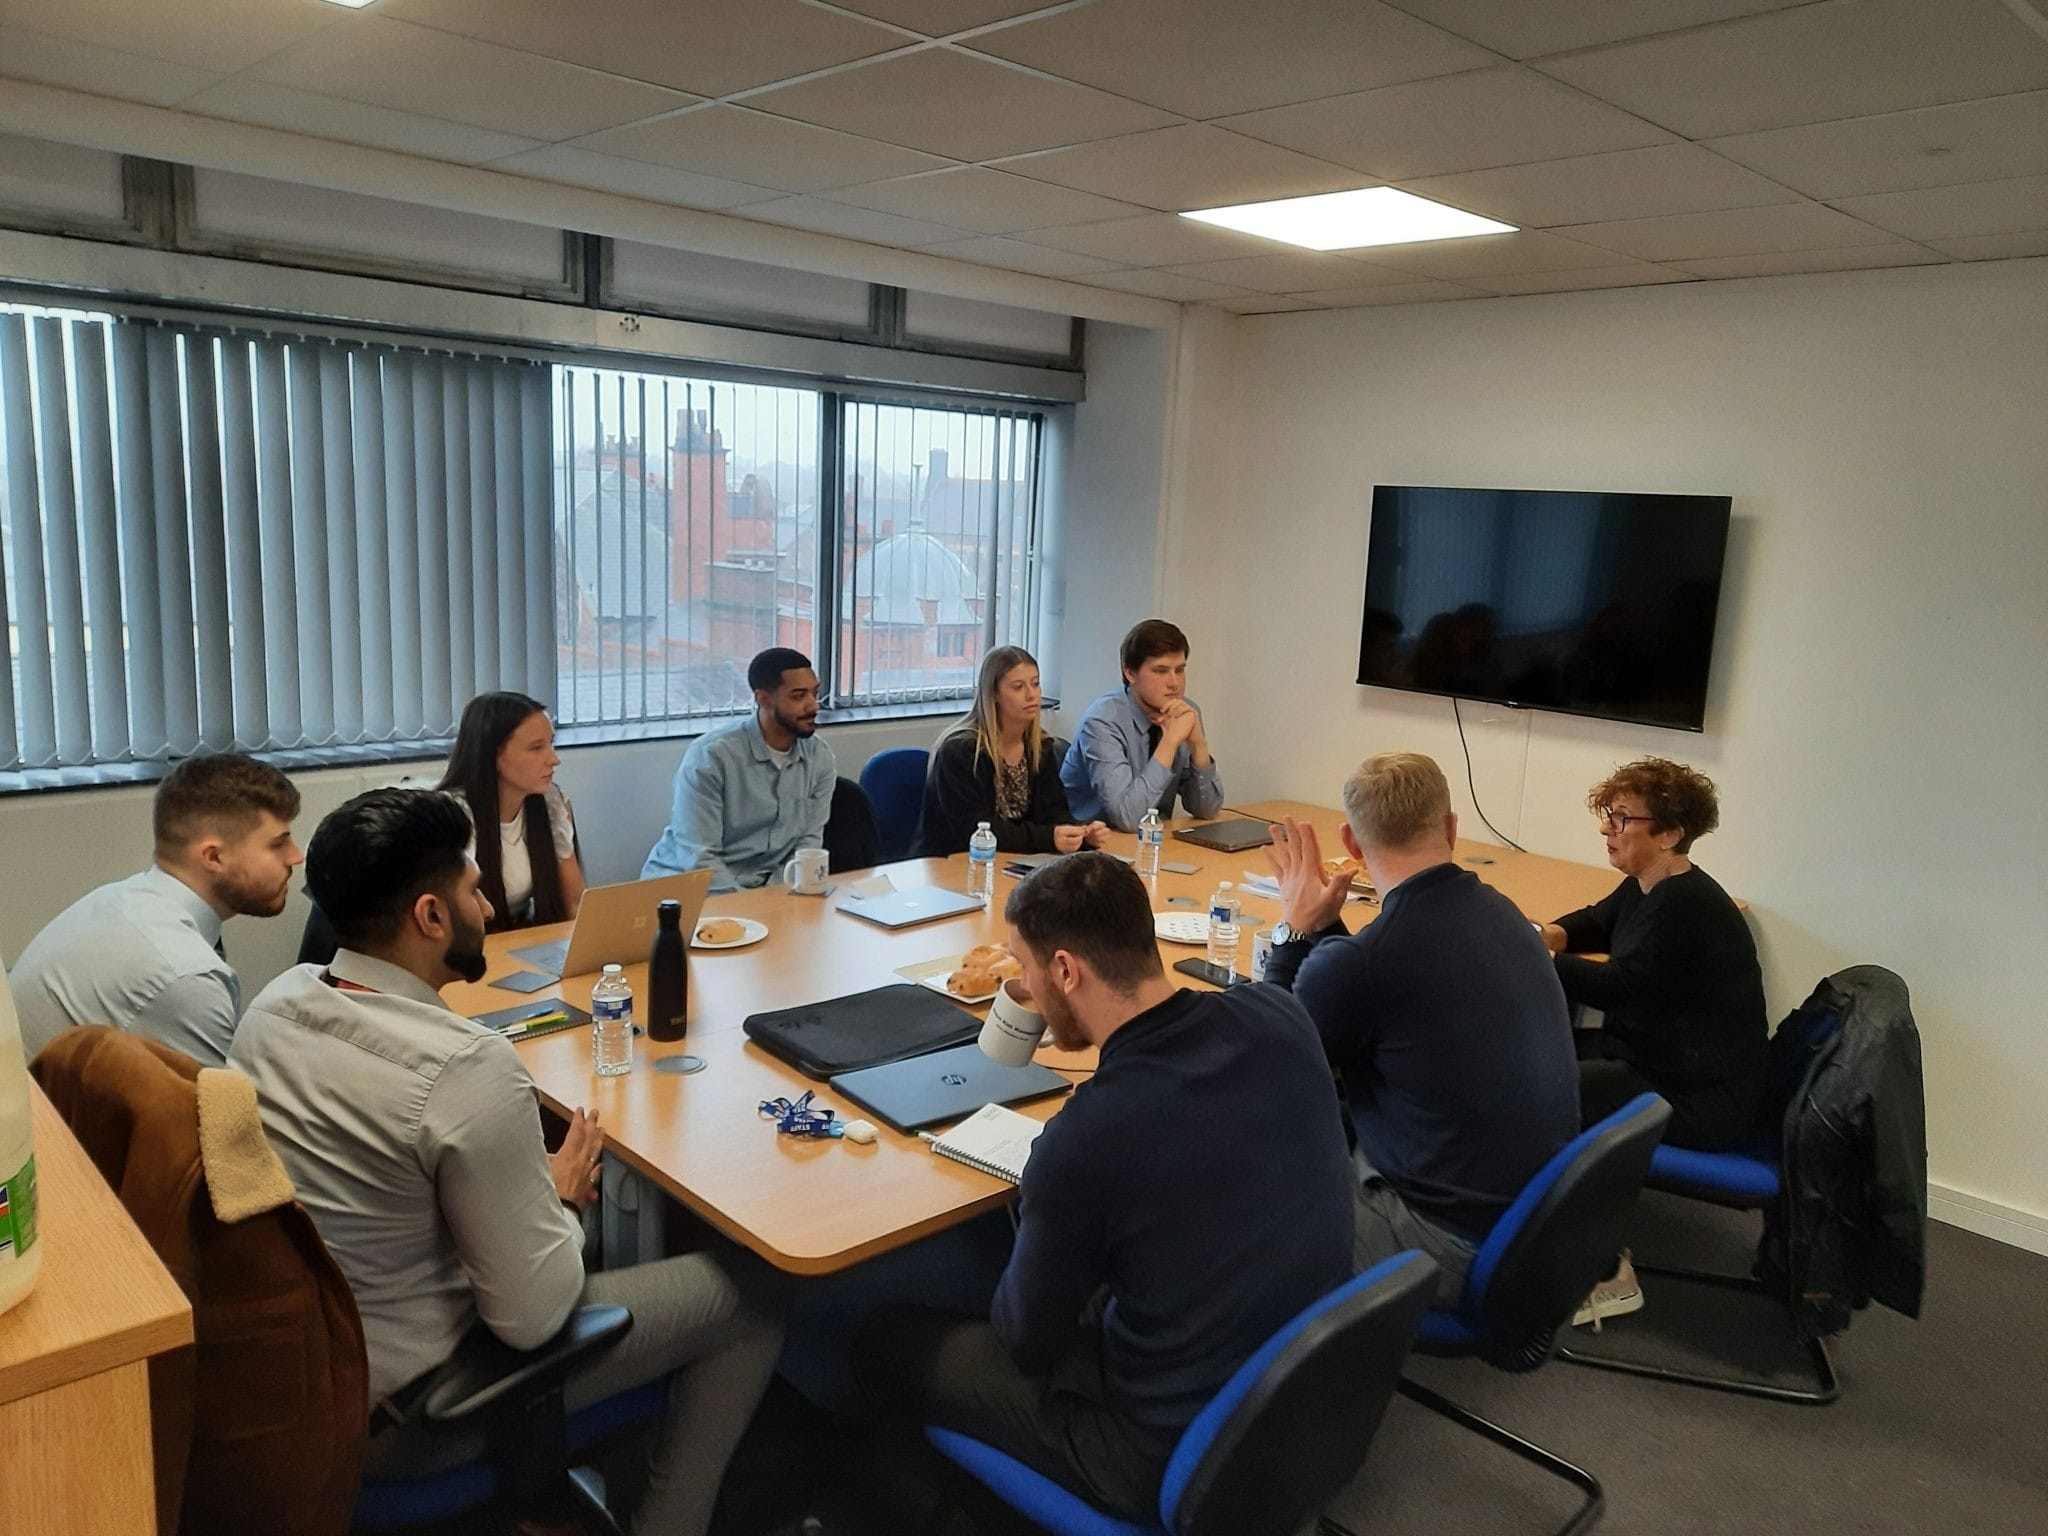 Our apprenticeship and graduate programme individuals had the incredible opportunity to meet Council Chief Executive Kath O'Dwyer for a mentoring session.